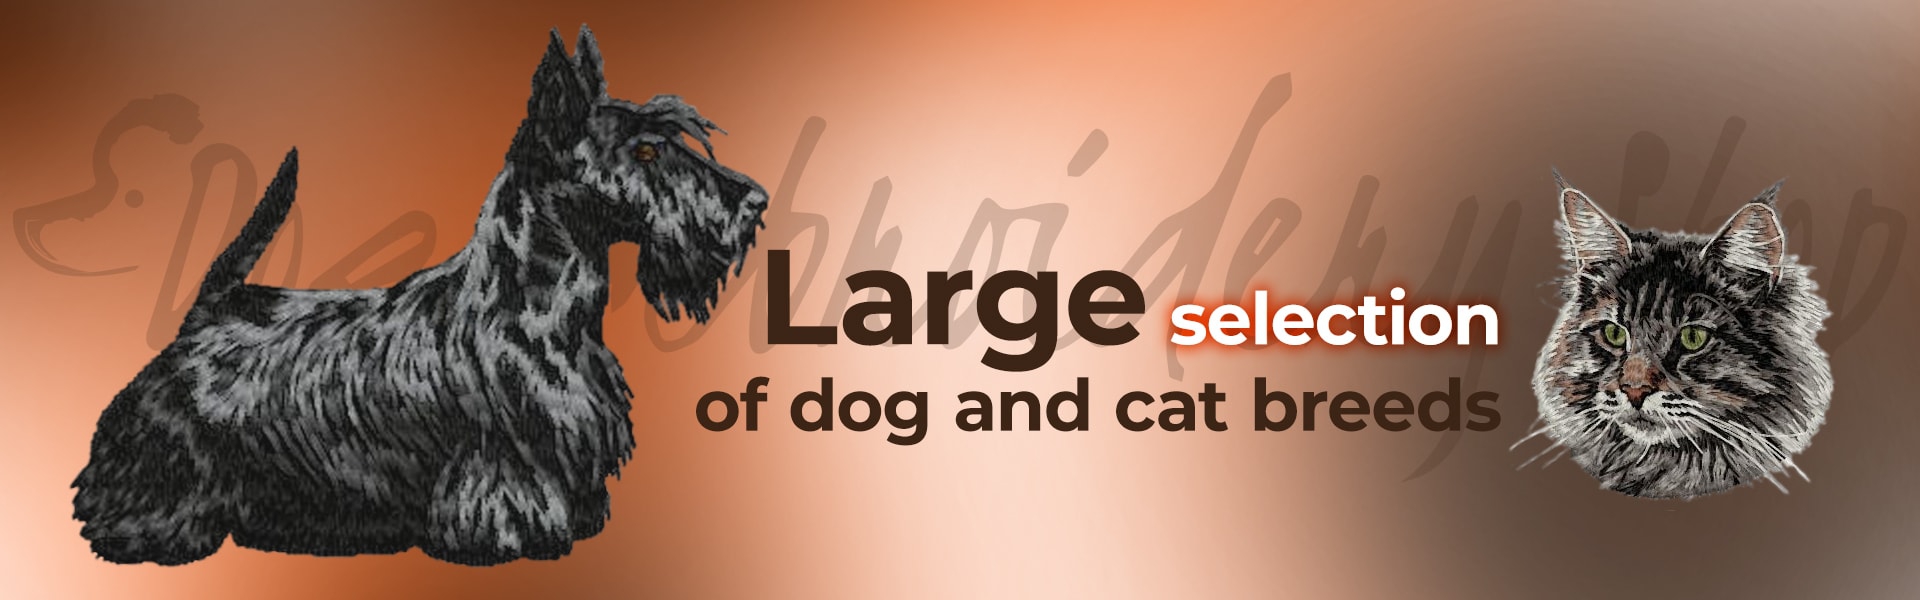 Large selection of dog and cat breeds